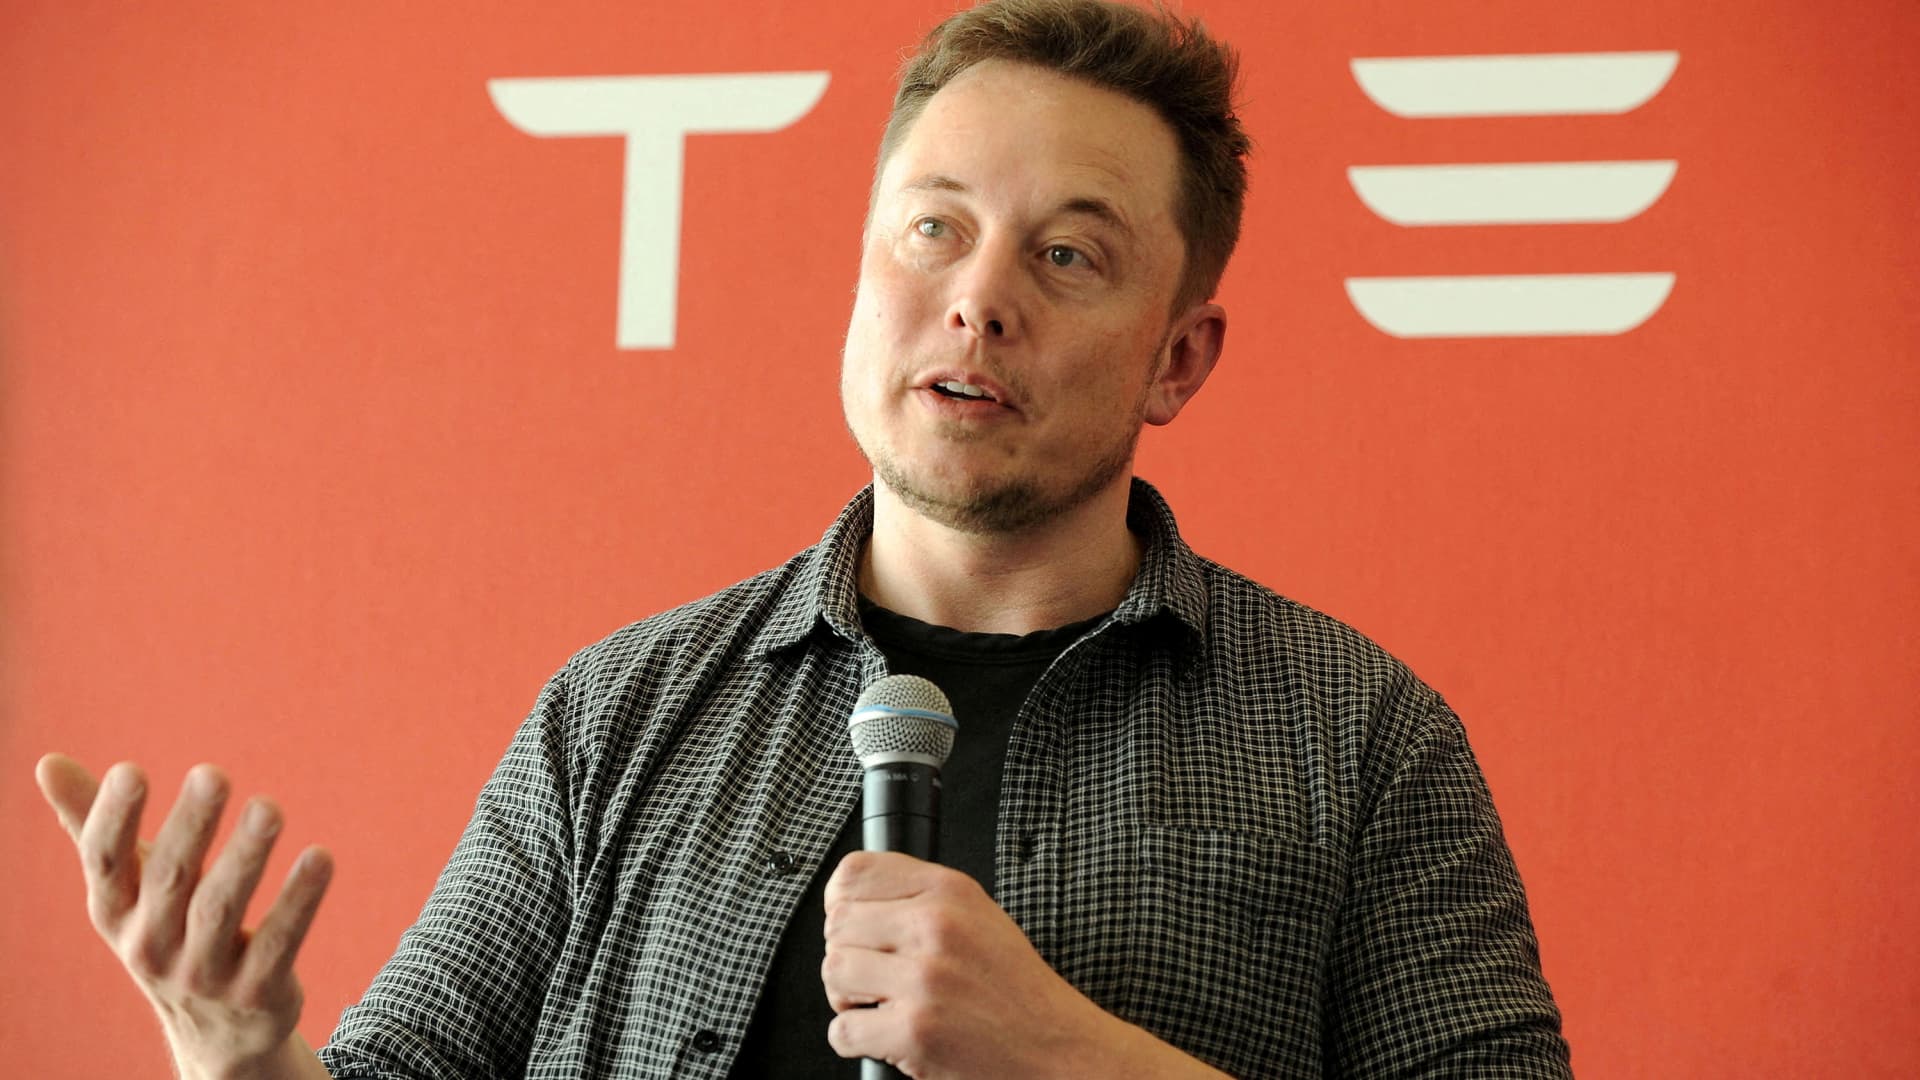 Founder and CEO of Tesla Motors Elon Musk speaks during a media tour of the Tesla Gigafactory, which will produce batteries for the electric carmaker, in Sparks, Nevada.